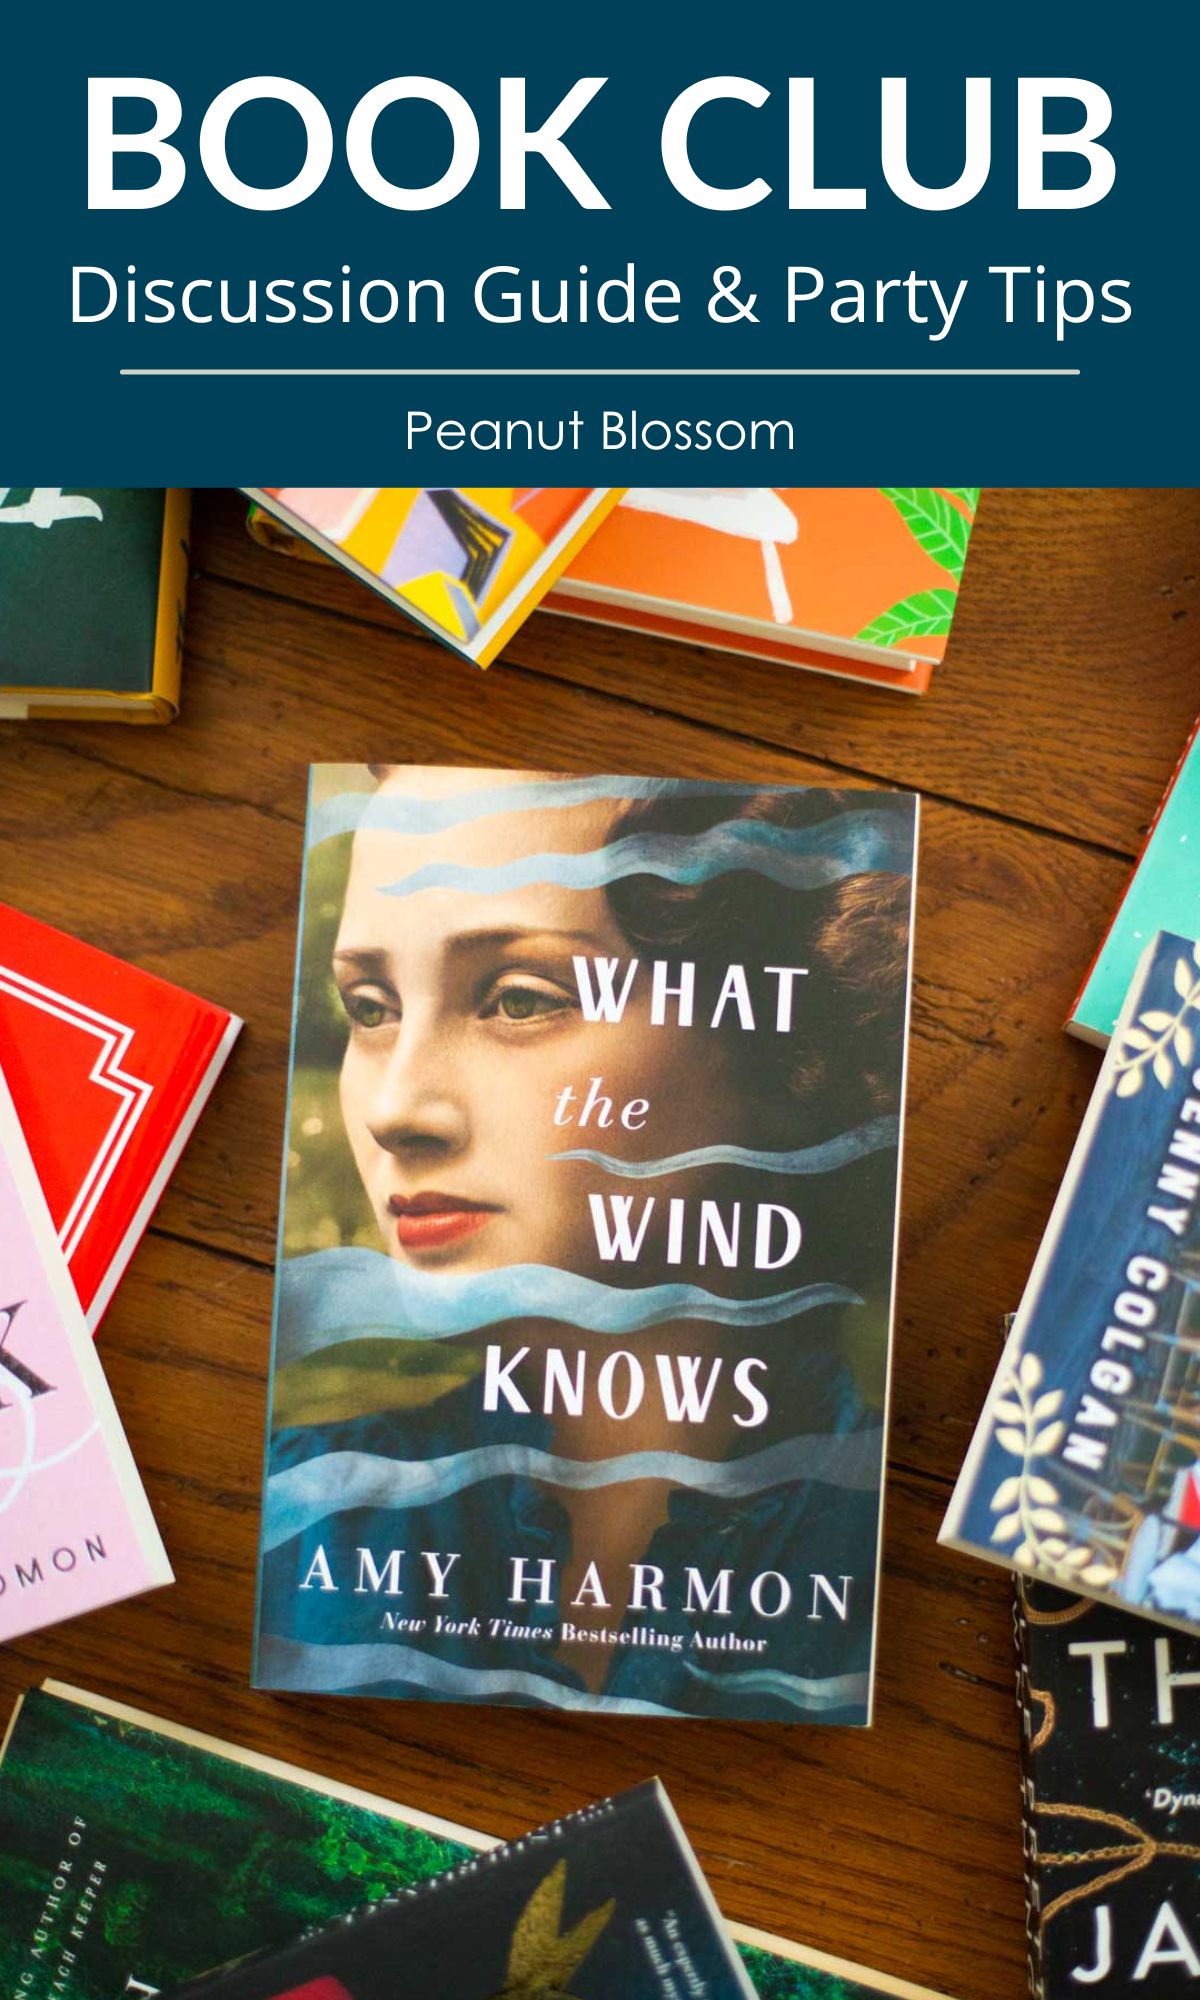 A copy of the book What the Wind Knows is on the table.